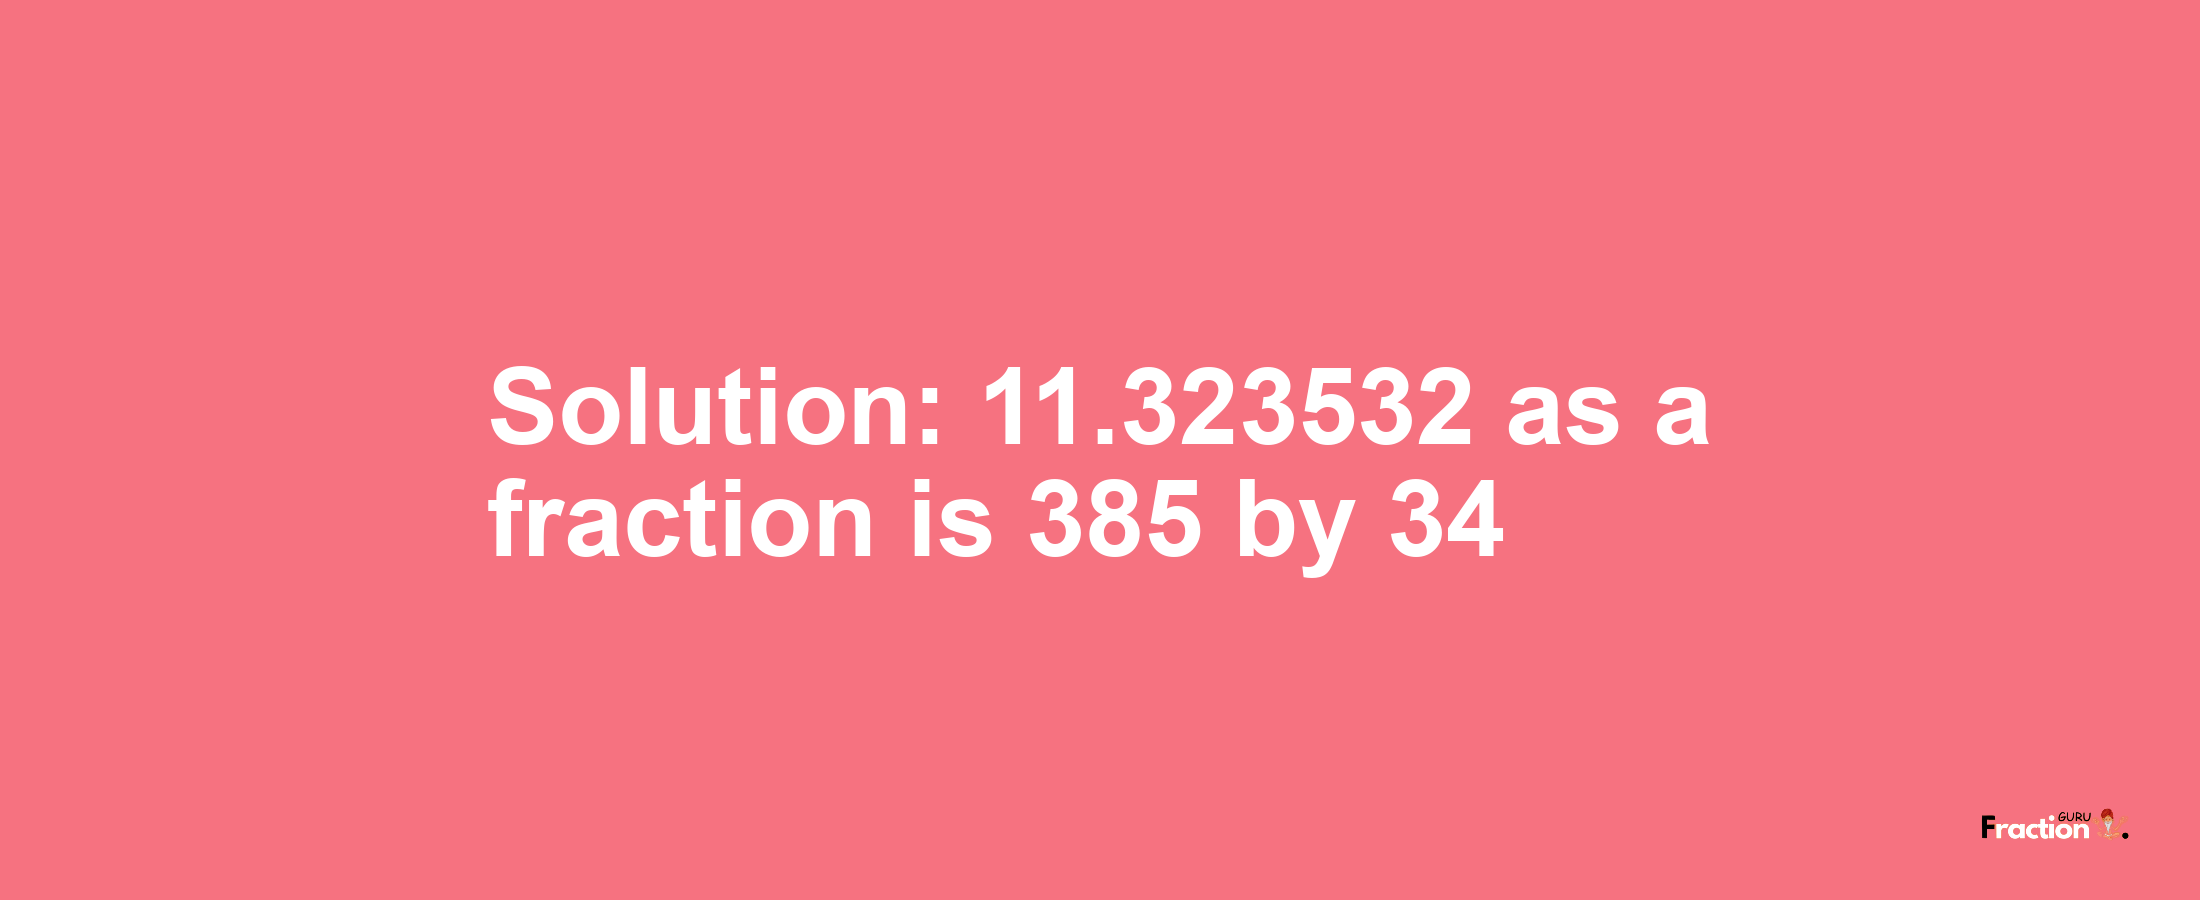 Solution:11.323532 as a fraction is 385/34